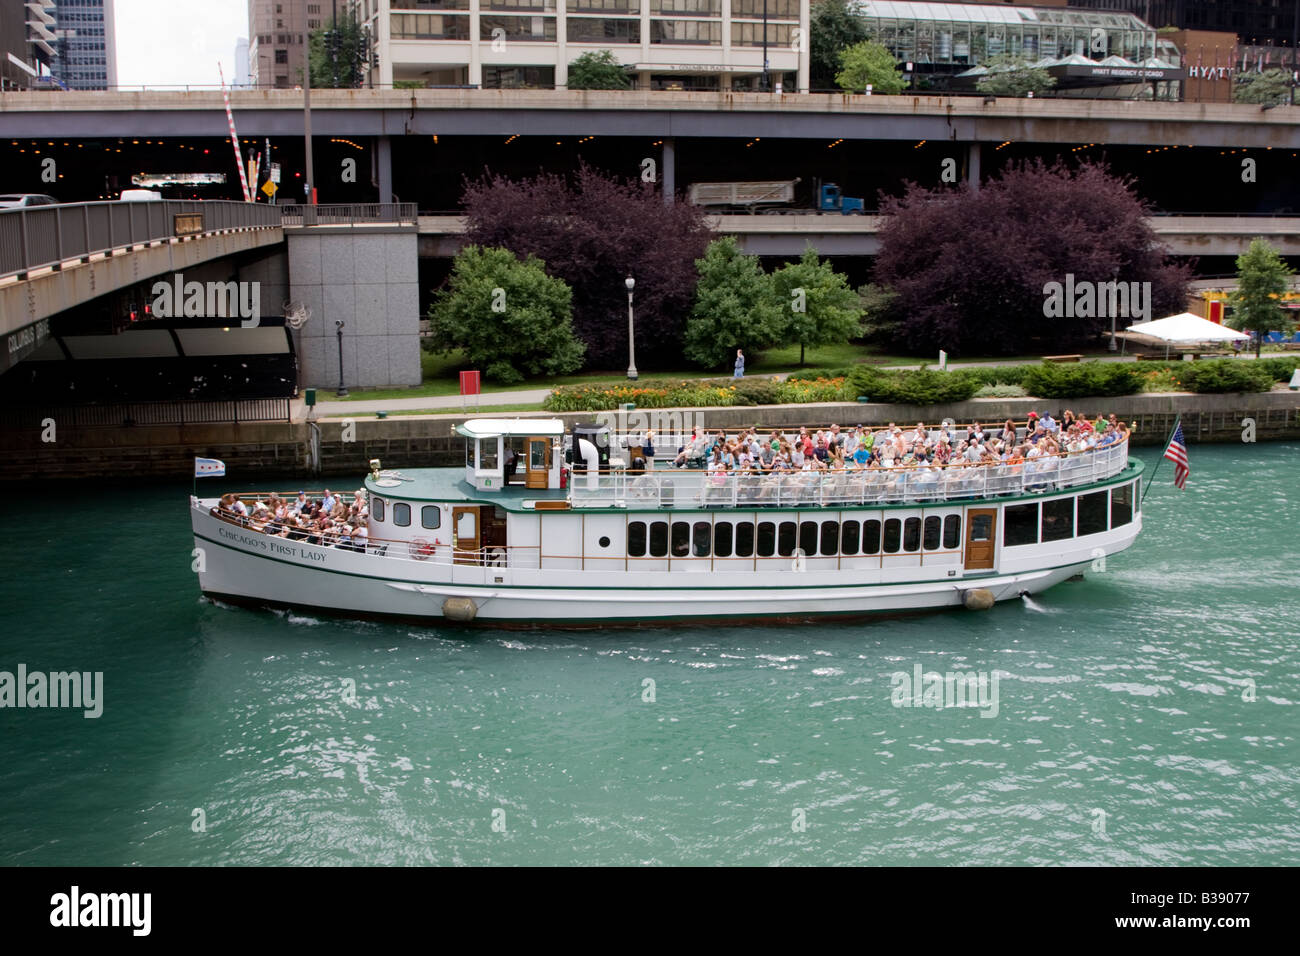 Chicago, Illinois. Tourist Boat, Chicago River. Elevated Roadways in background. Stock Photo